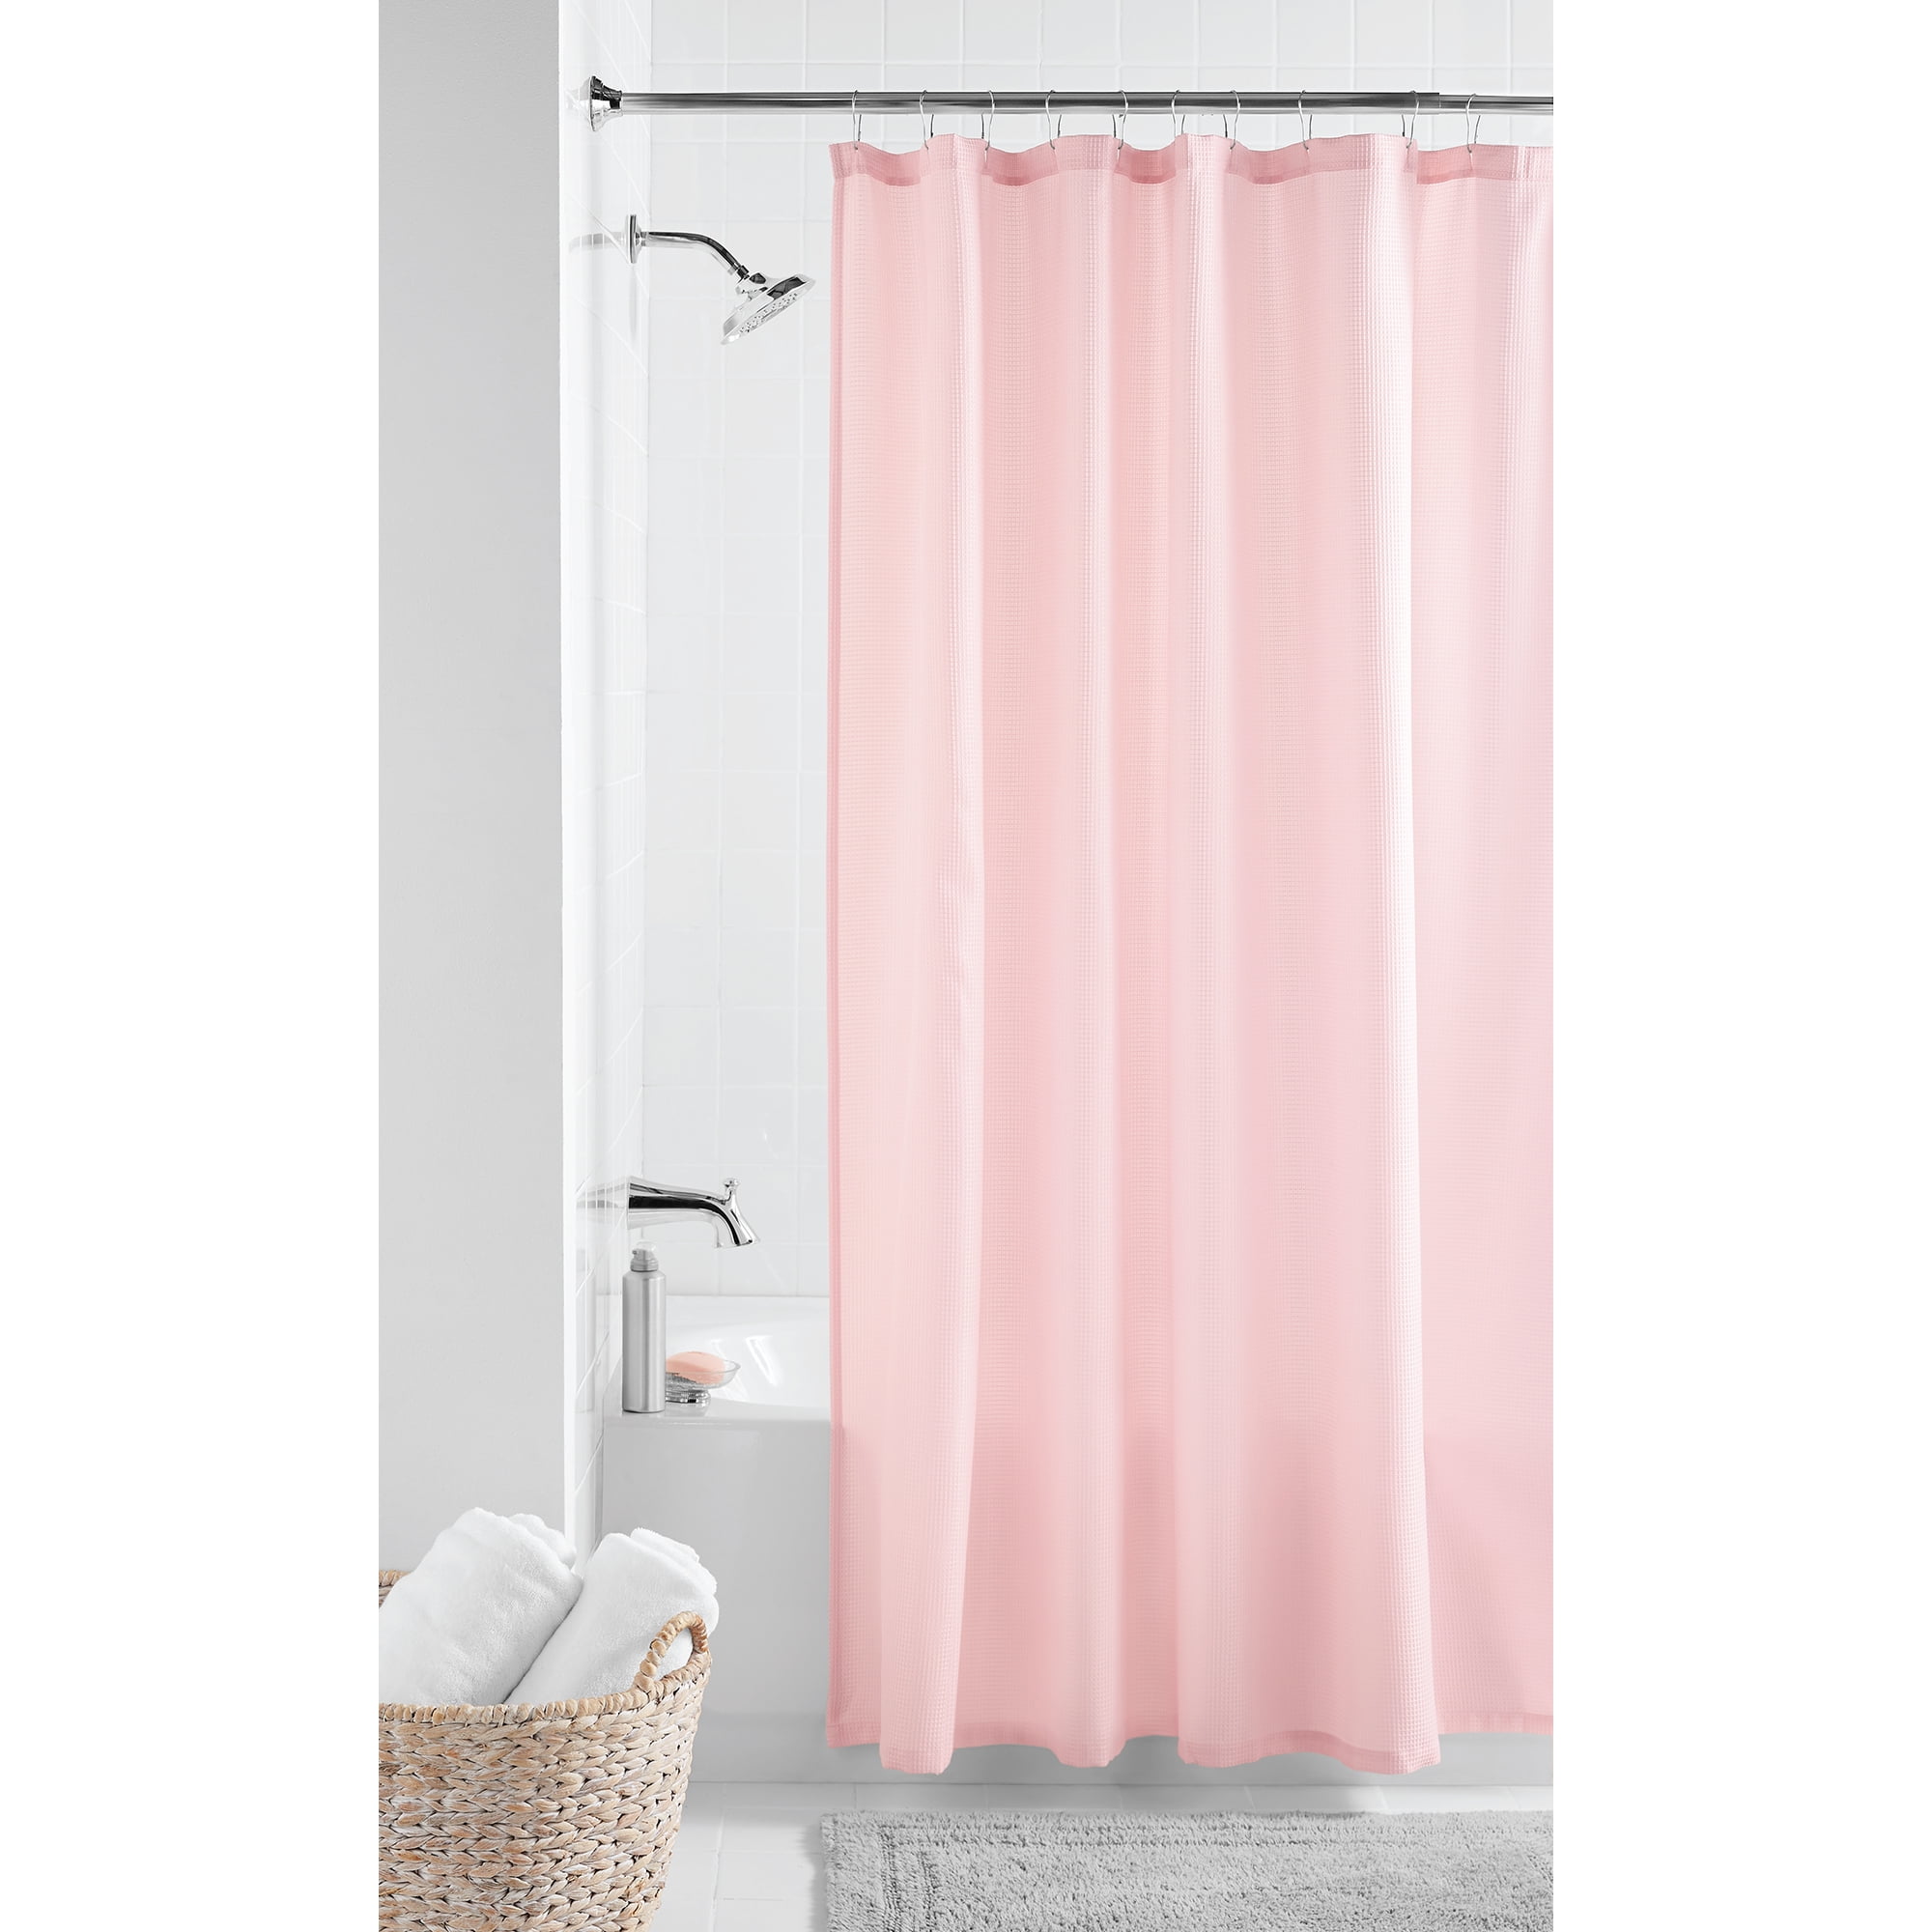 mDesign Long Polyester/Cotton Blend Fabric Shower Curtain with Waffle Weave and 